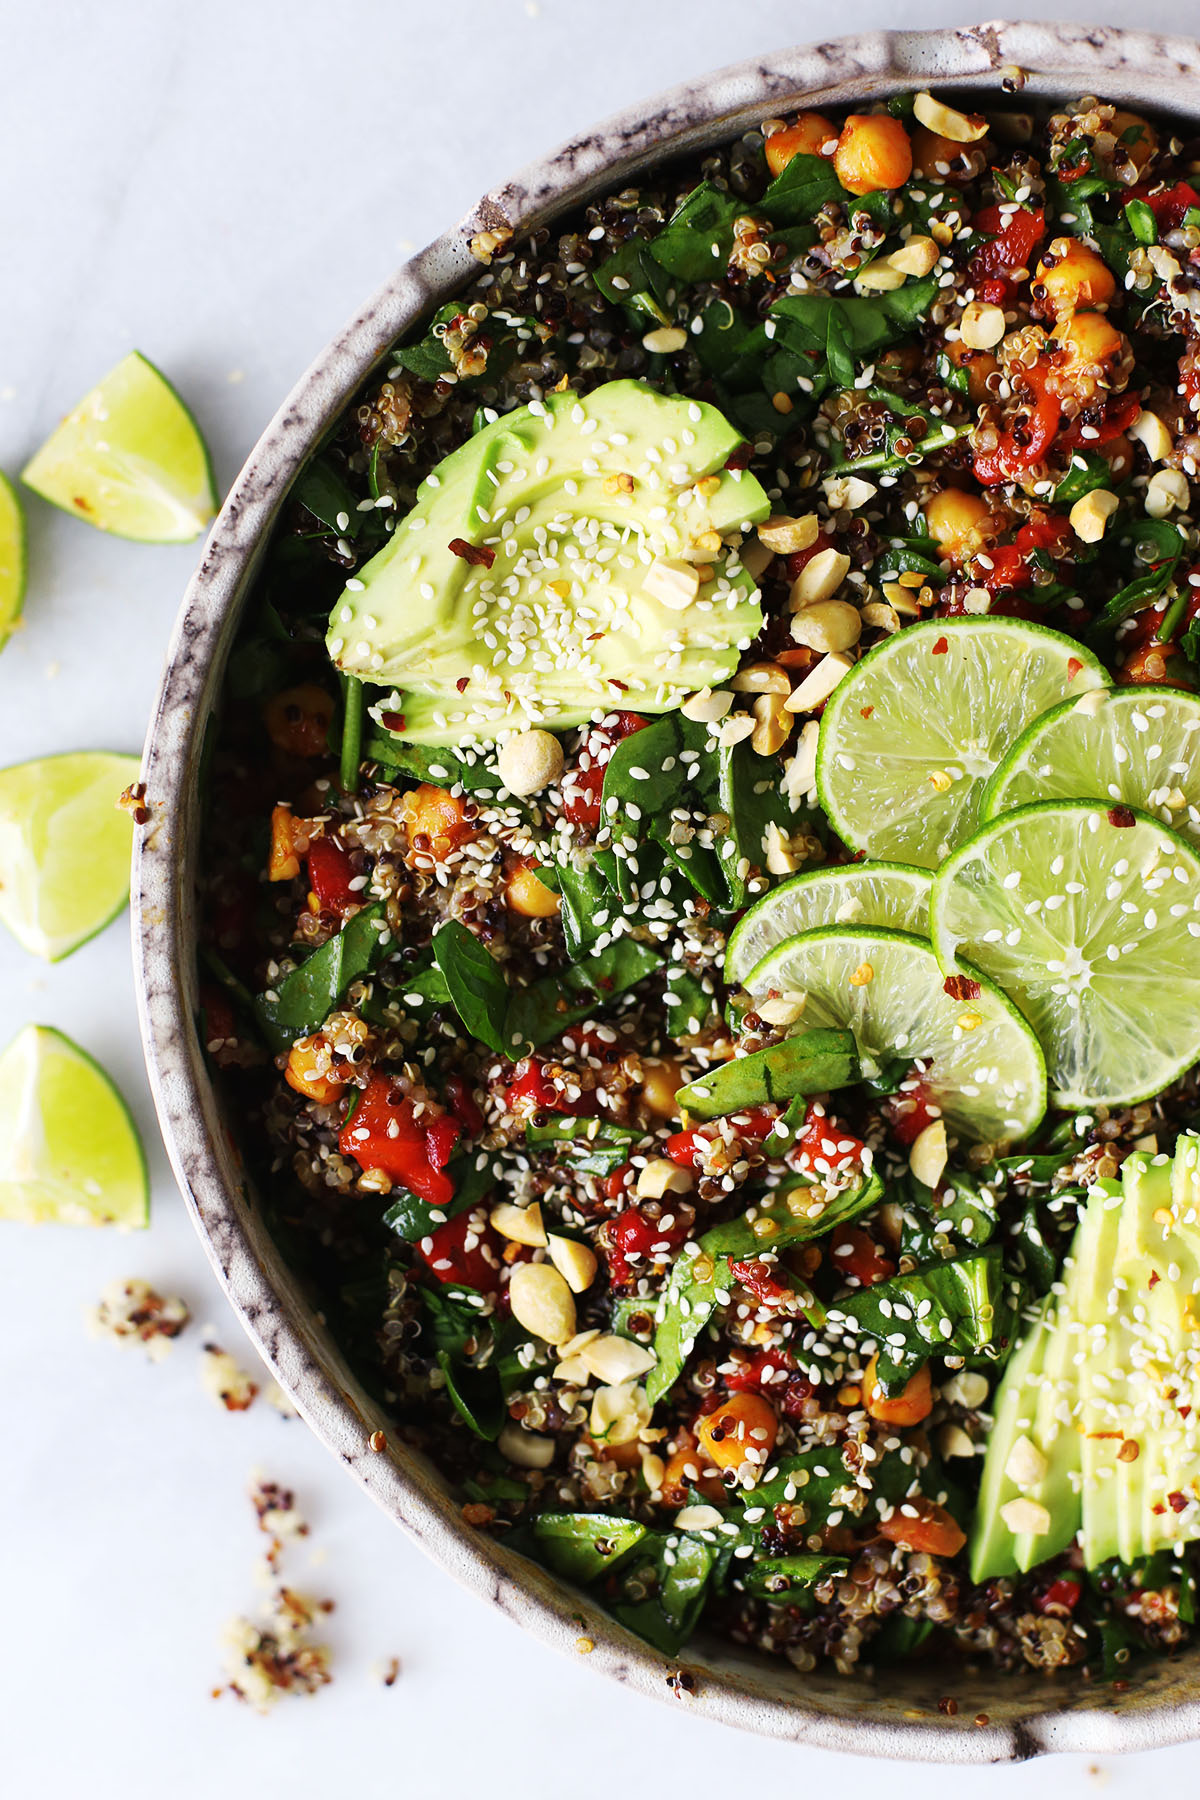 Chickpea Quinoa Salad with a Spicy Garlic Lime Dressing